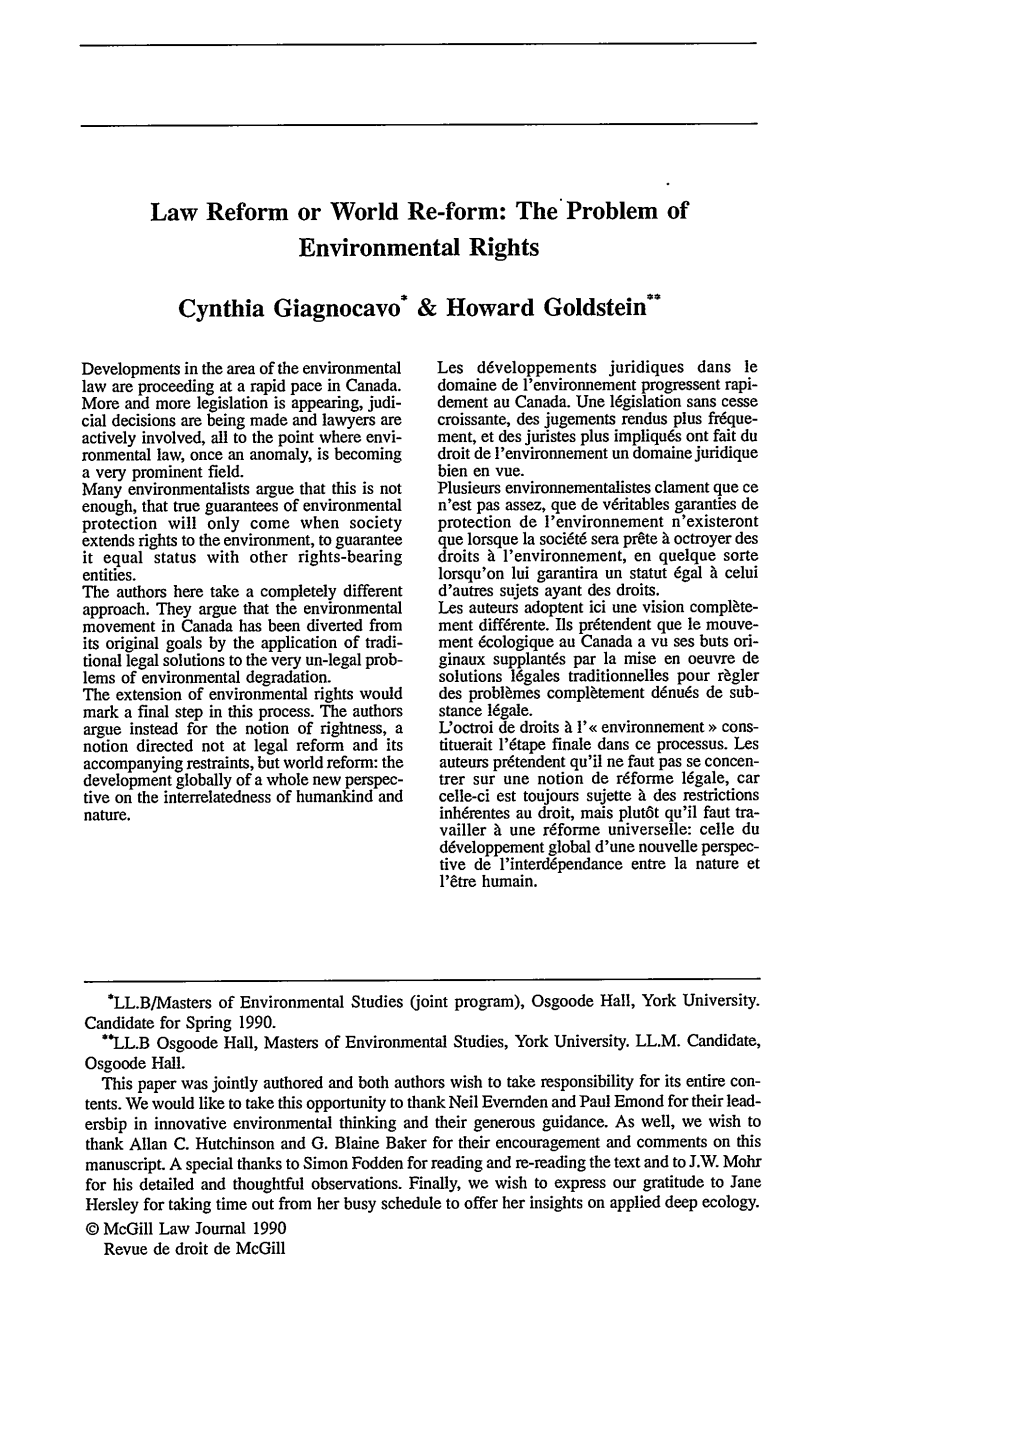 Law Reform Or World Re-Form: the Problem of Environmental Rights